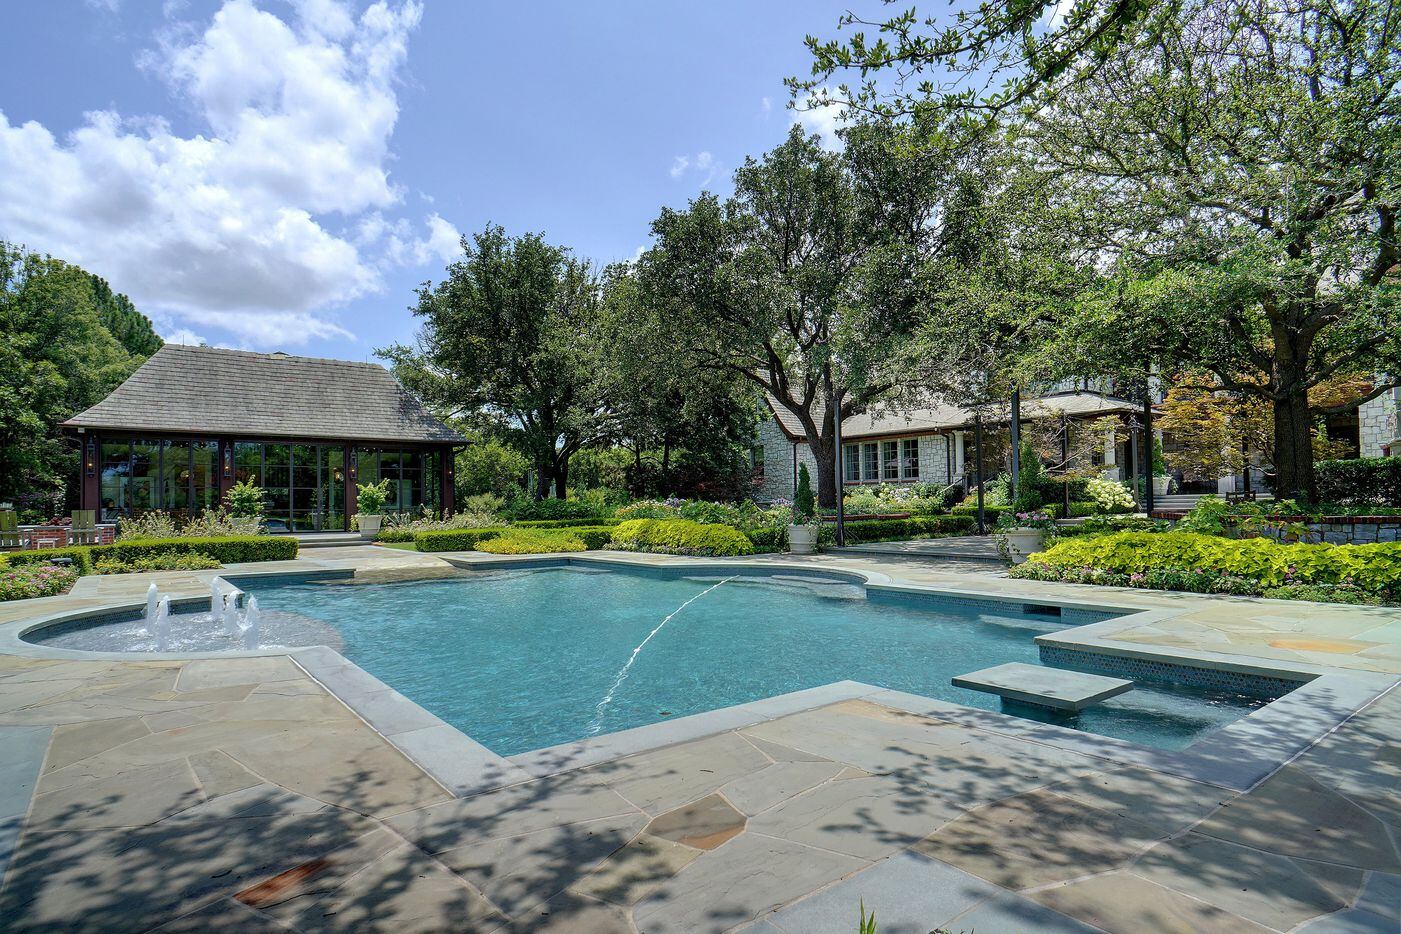 The property at 6401 Westcoat Drive in Colleyville has an abundance of outdoor entertaining areas from a pool and a spa to a cabana, putting green and greenhouse.